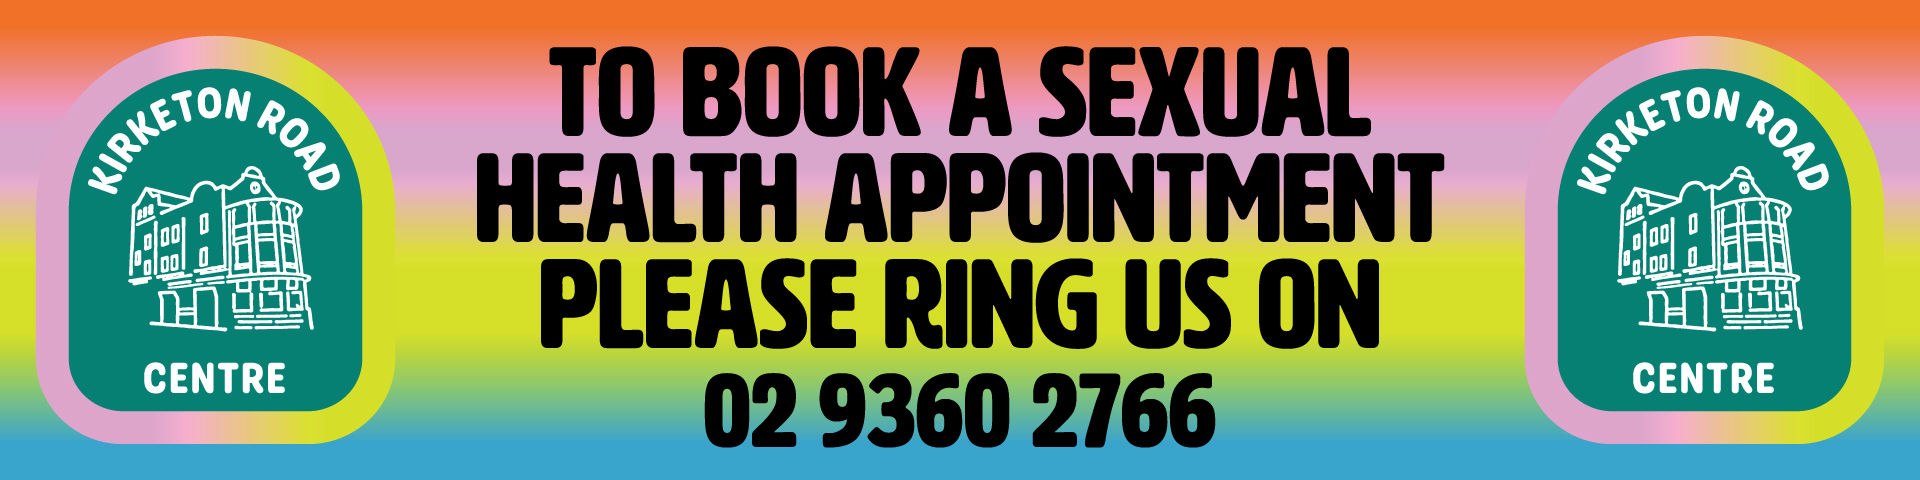 KRC The kirketon Road centre - to book a sexual health appointment please ring us on 02 9360 2766